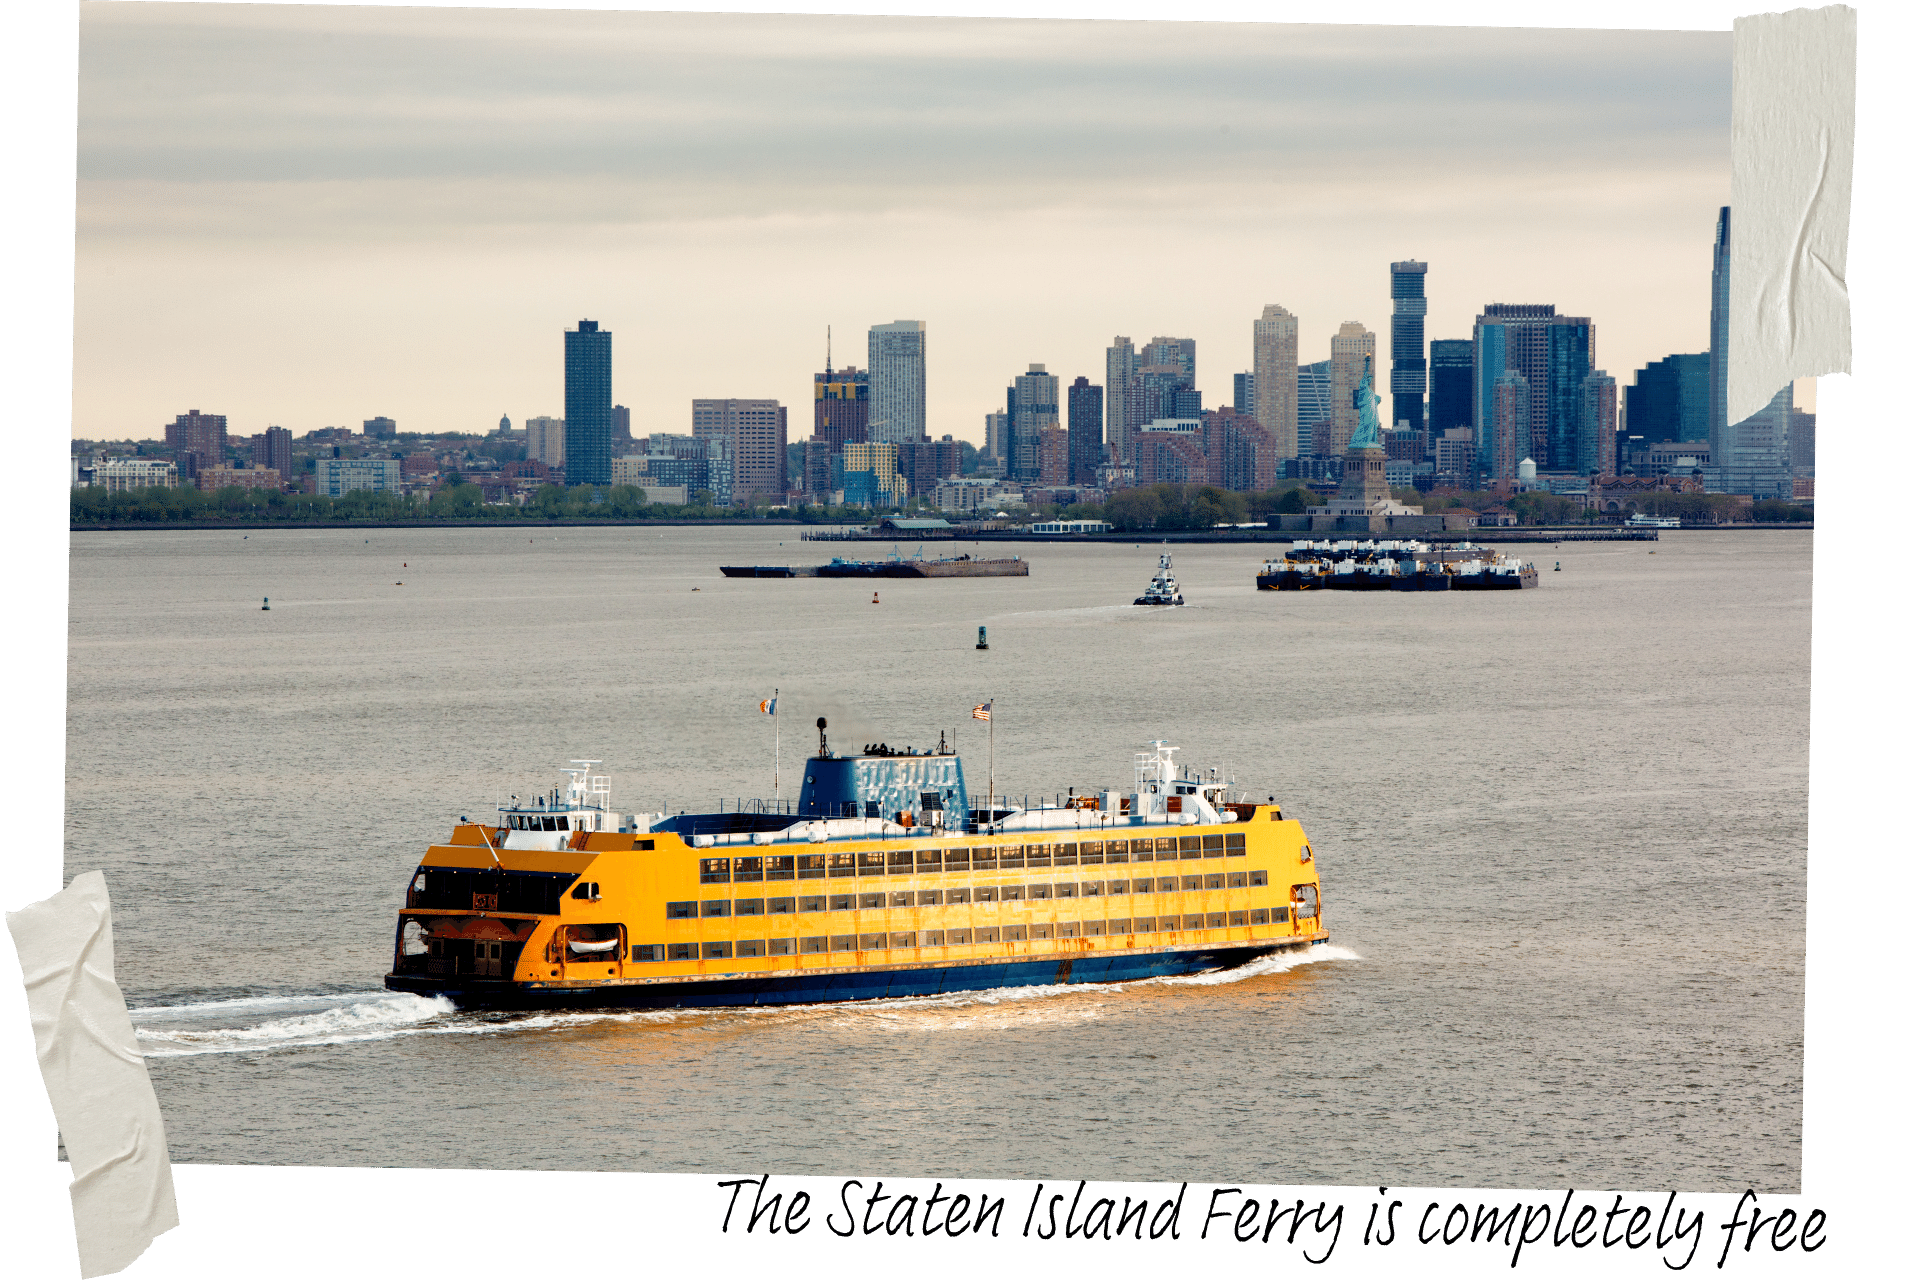 A yellow ferry crosses the river, the New York city skyline in the background against an overcast sky.